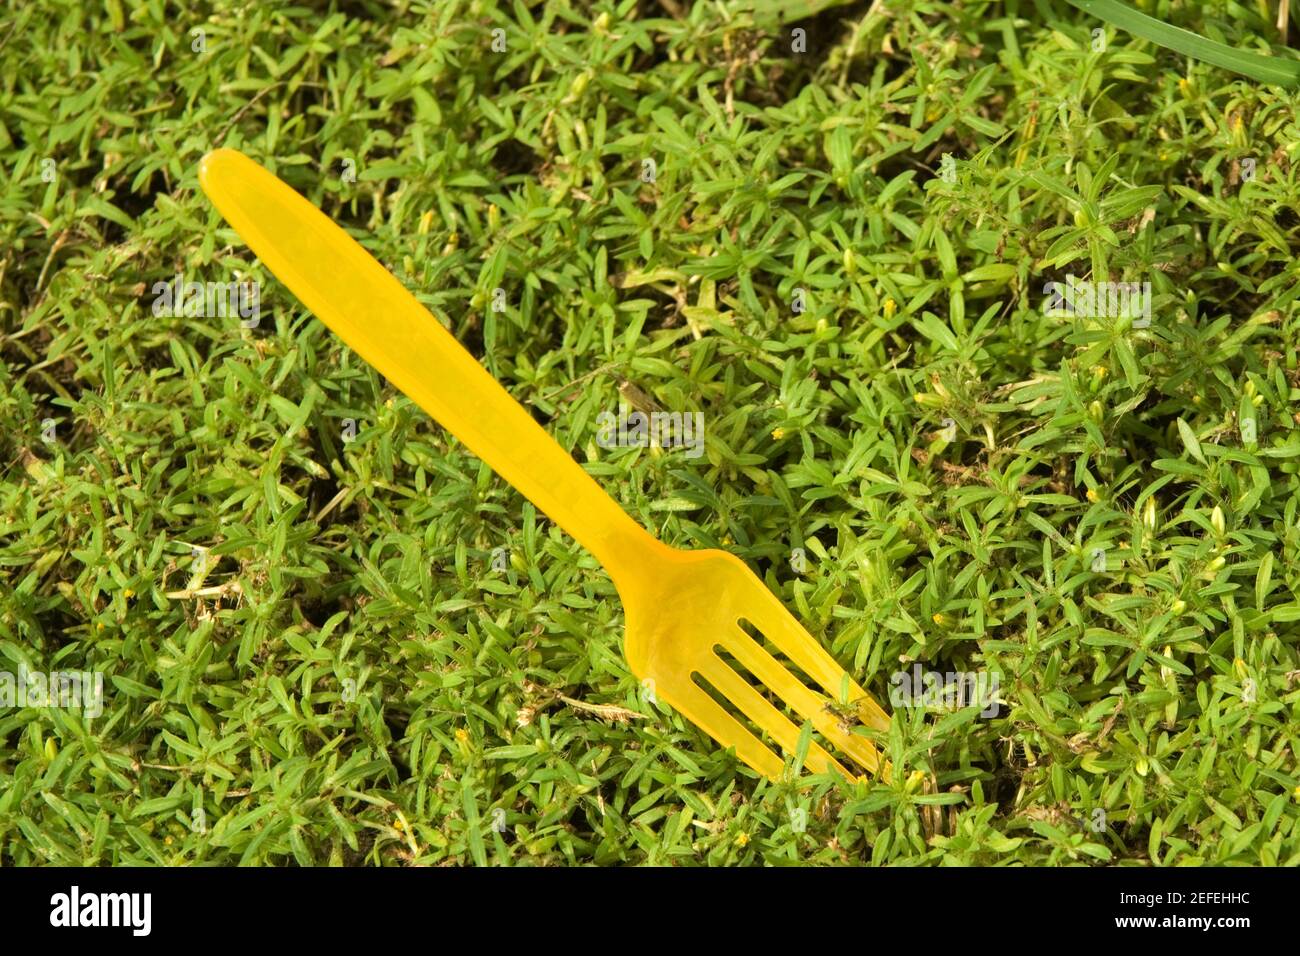 High angle view of a disposable fork on the grass Stock Photo